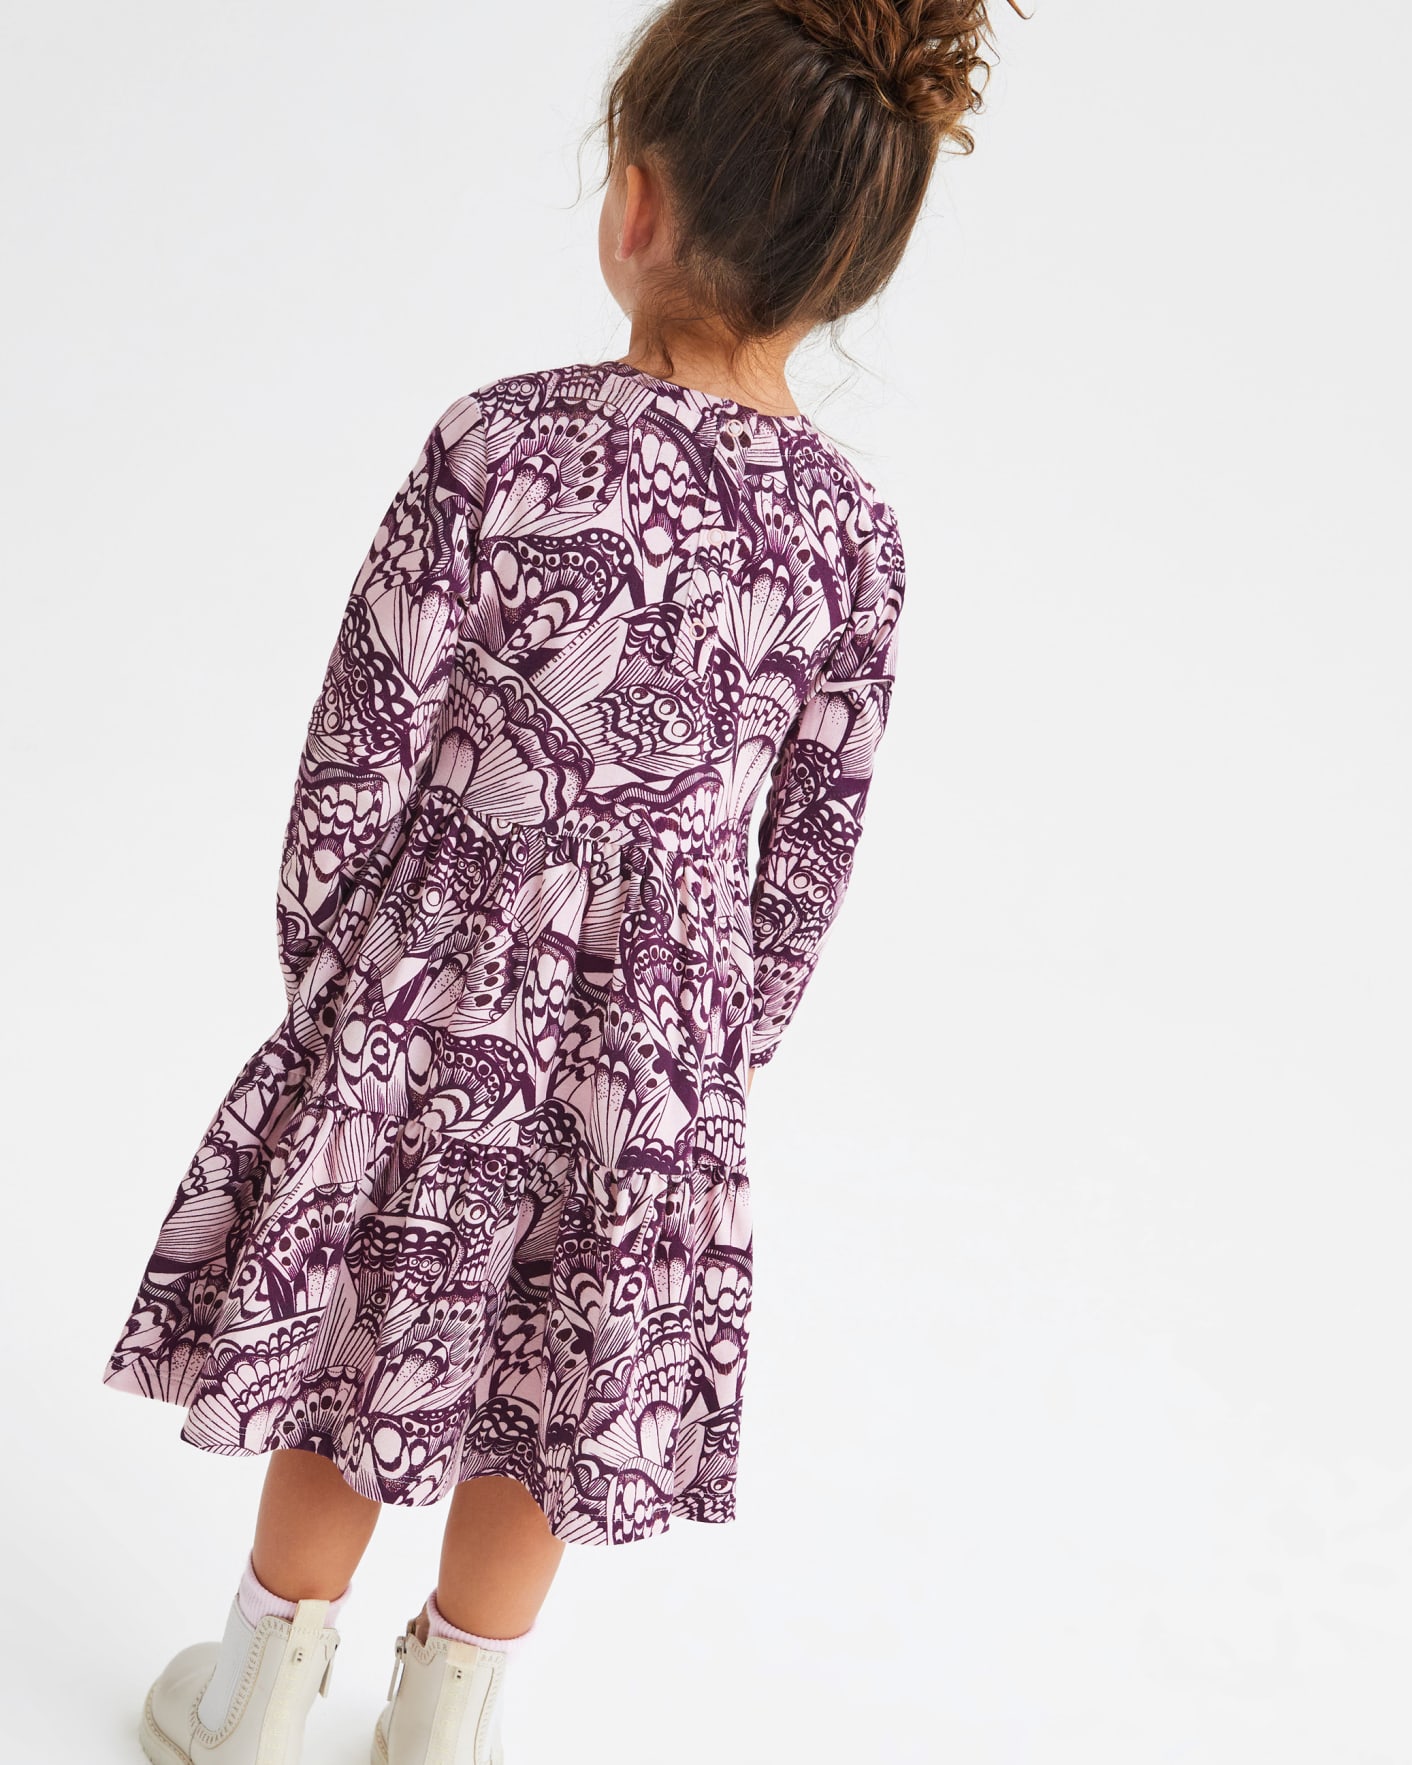 Lila Printed Tiered Dress Ted Baker